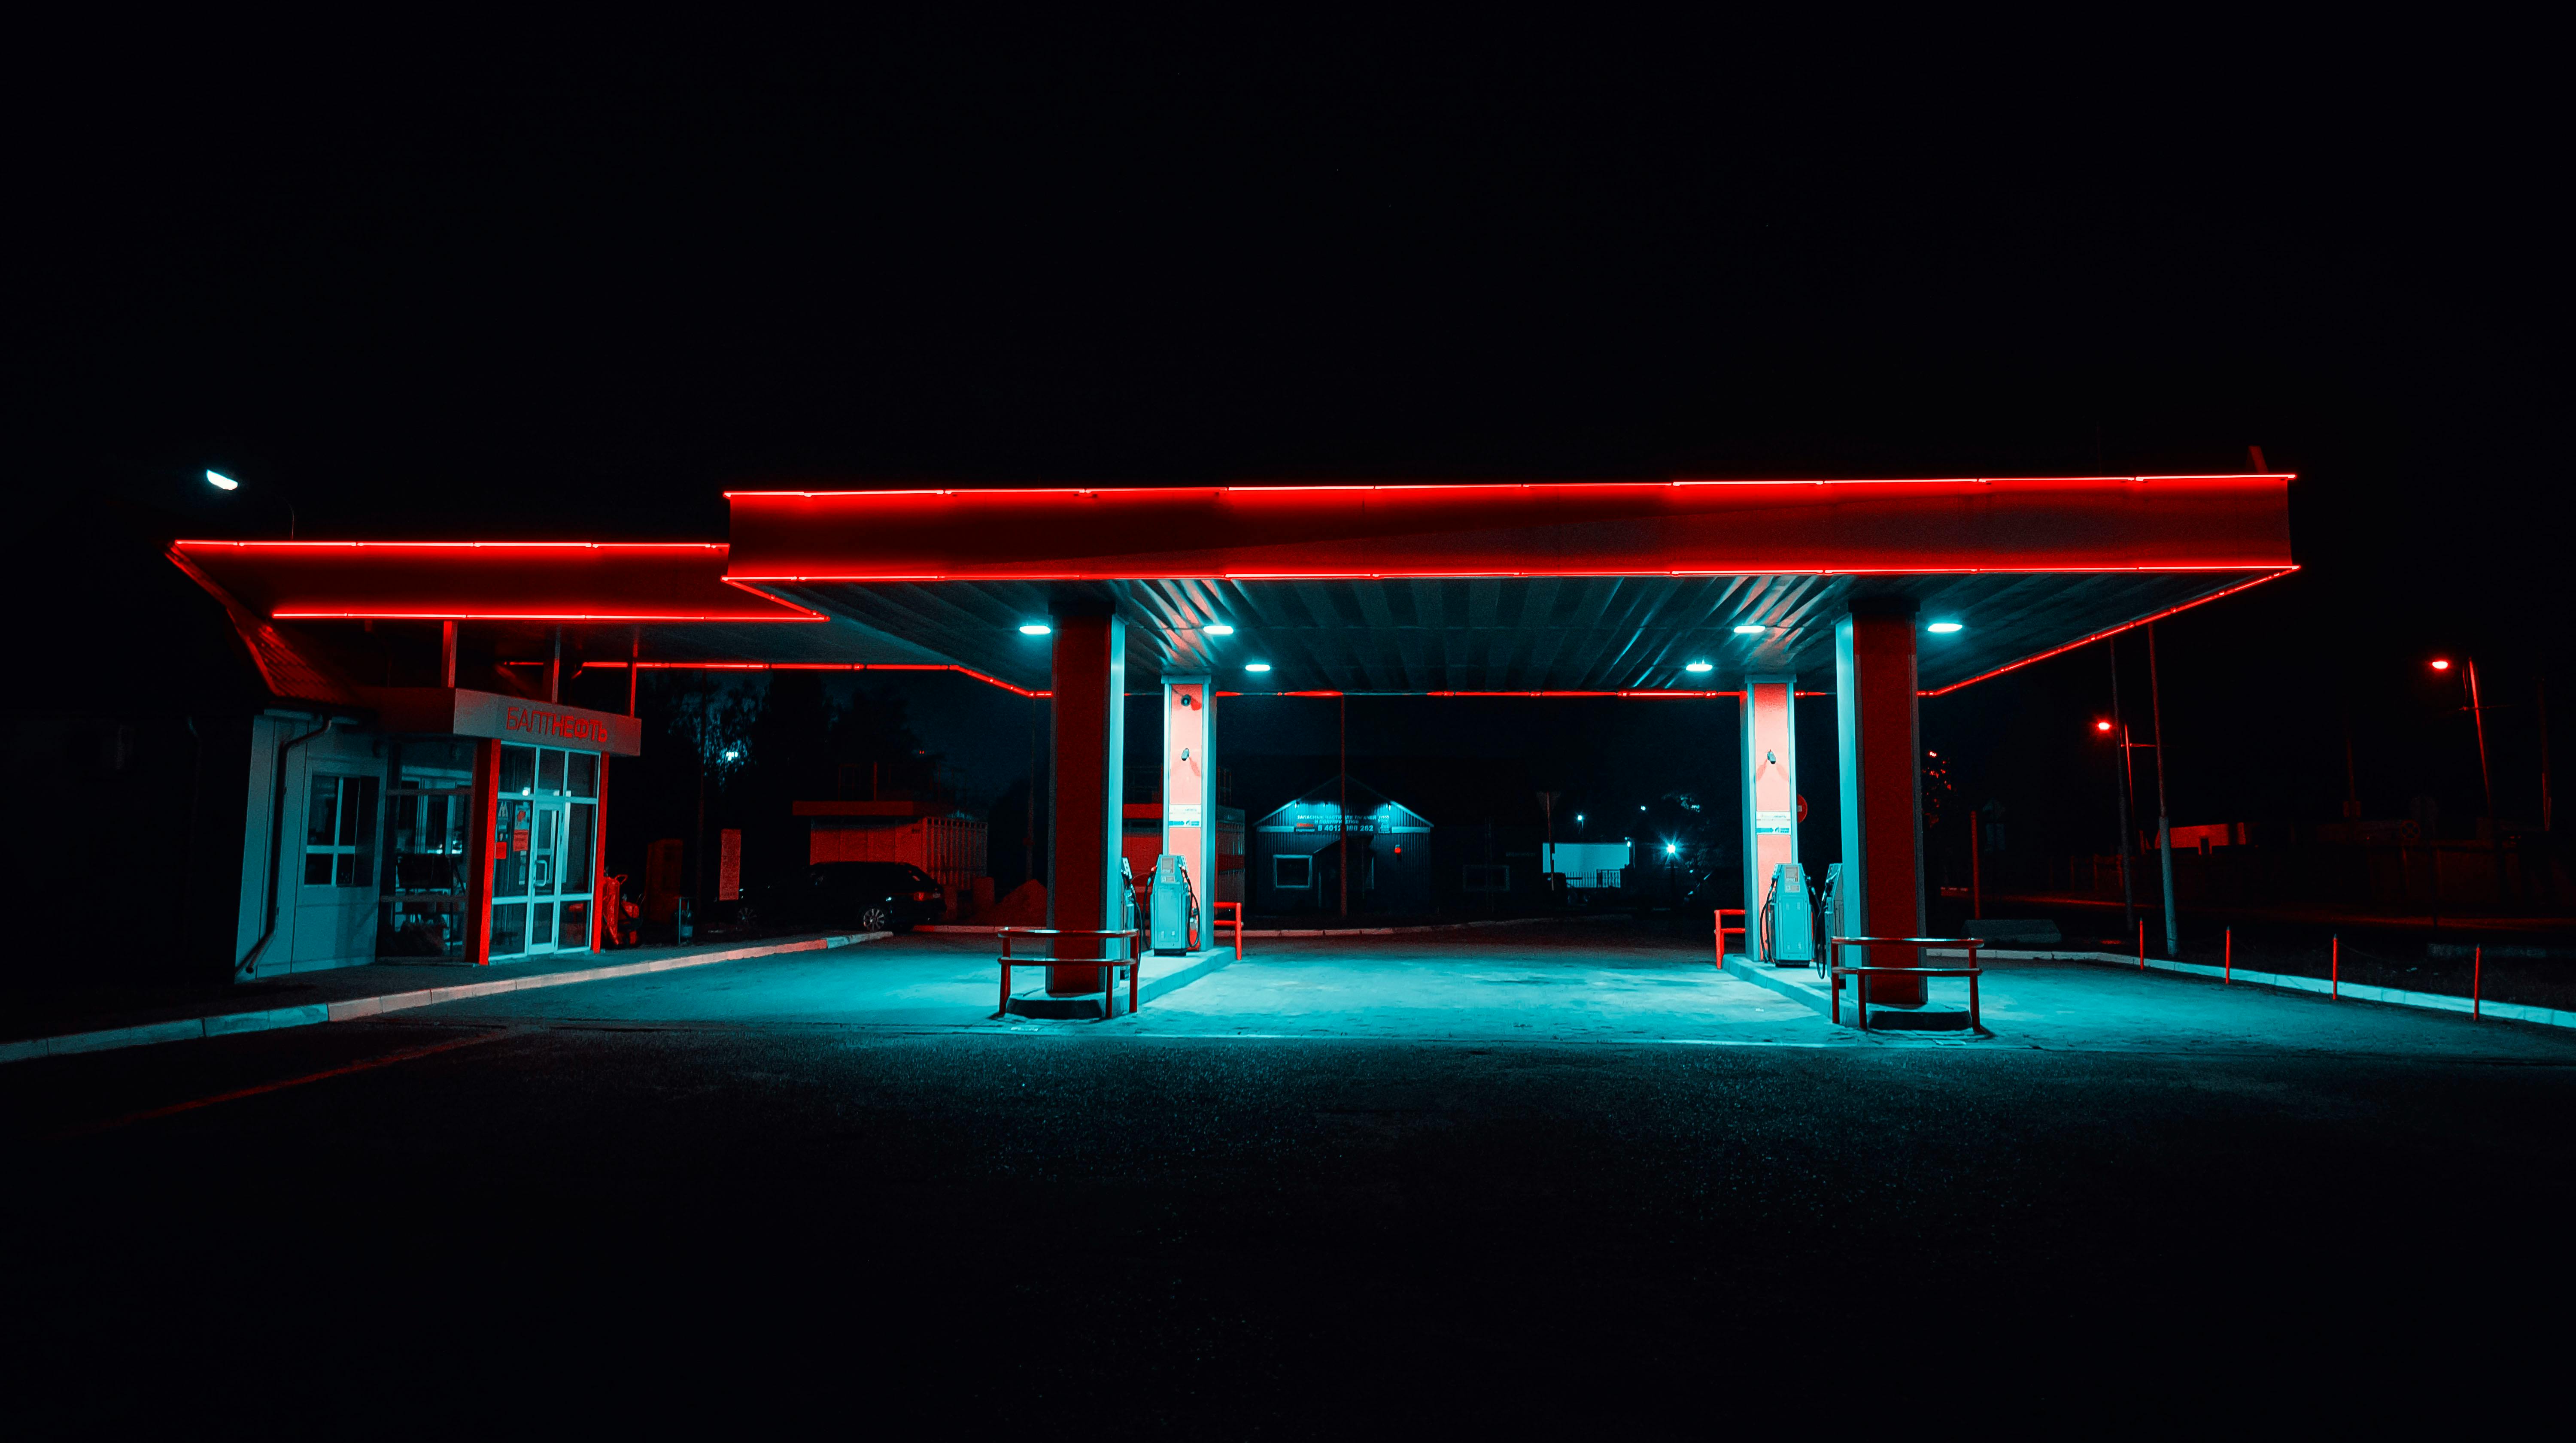 gasoline station during nighttime